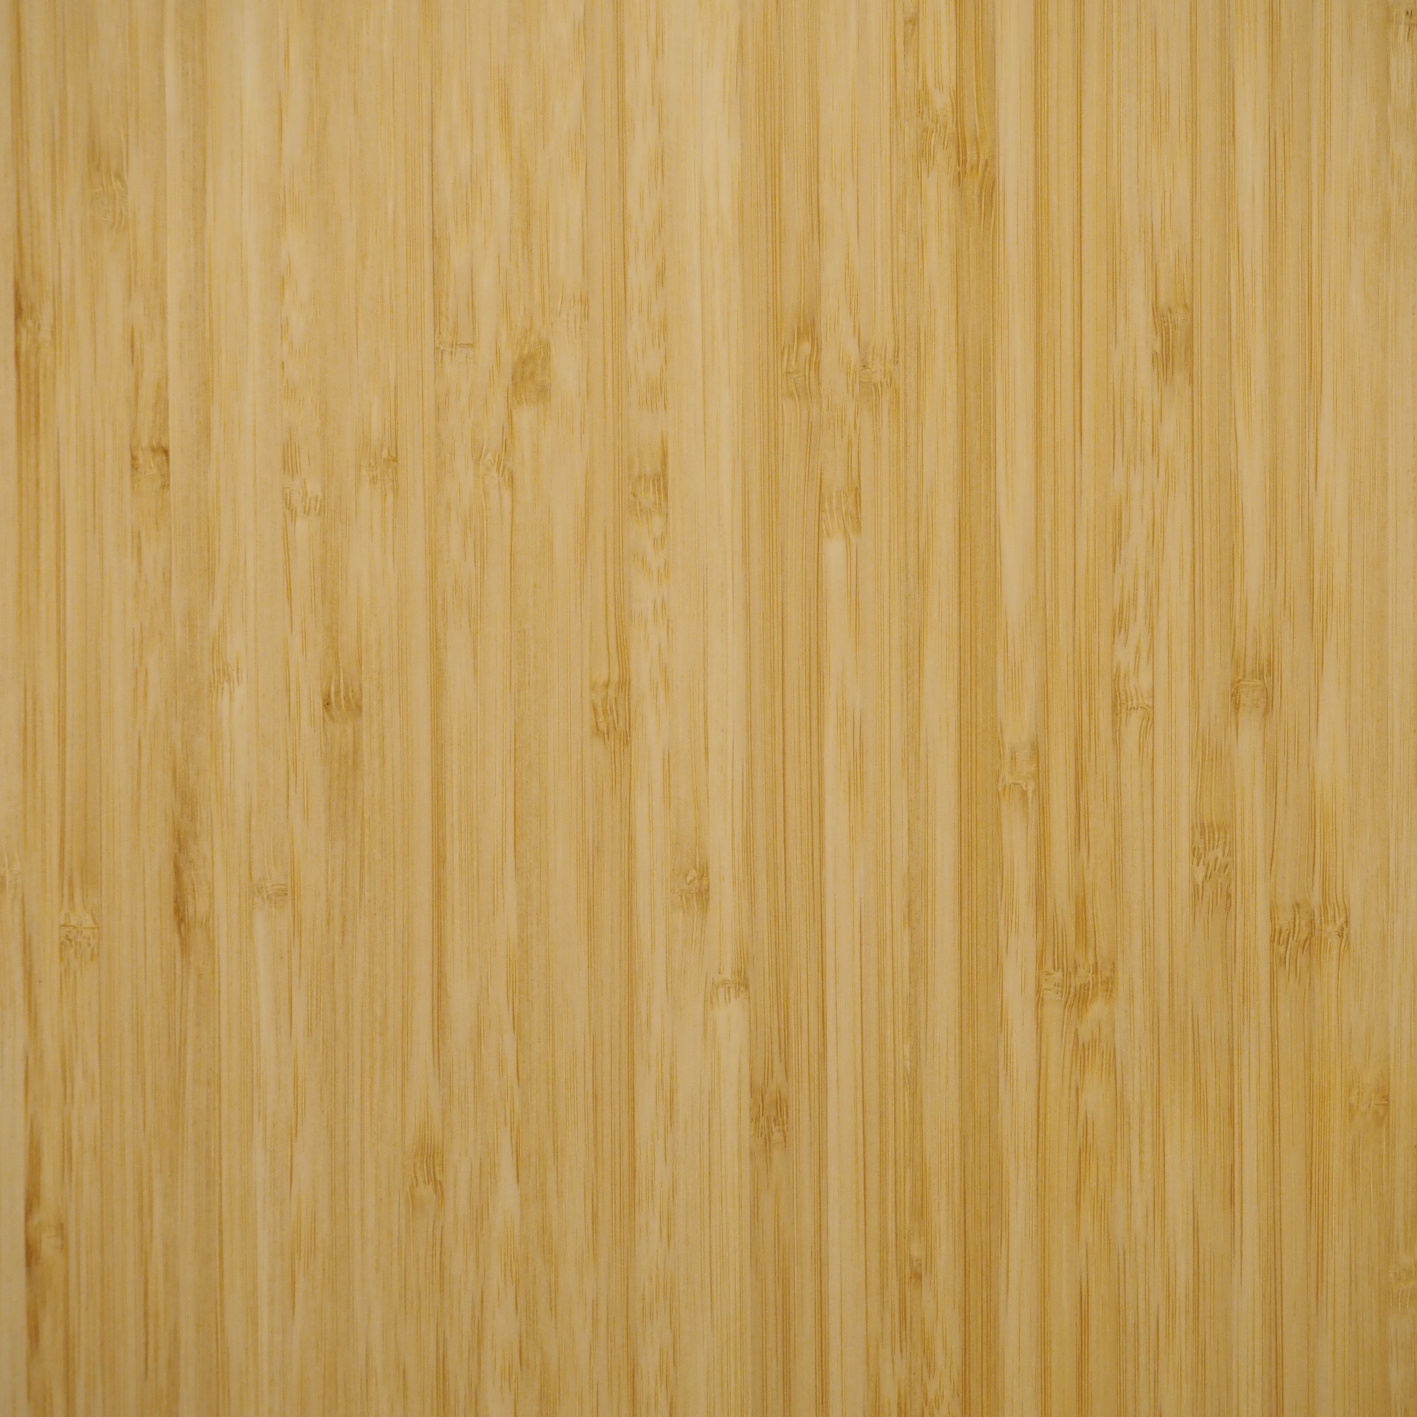 Board in cross laminated bamboo (100 x 80 cm) - With cable holes